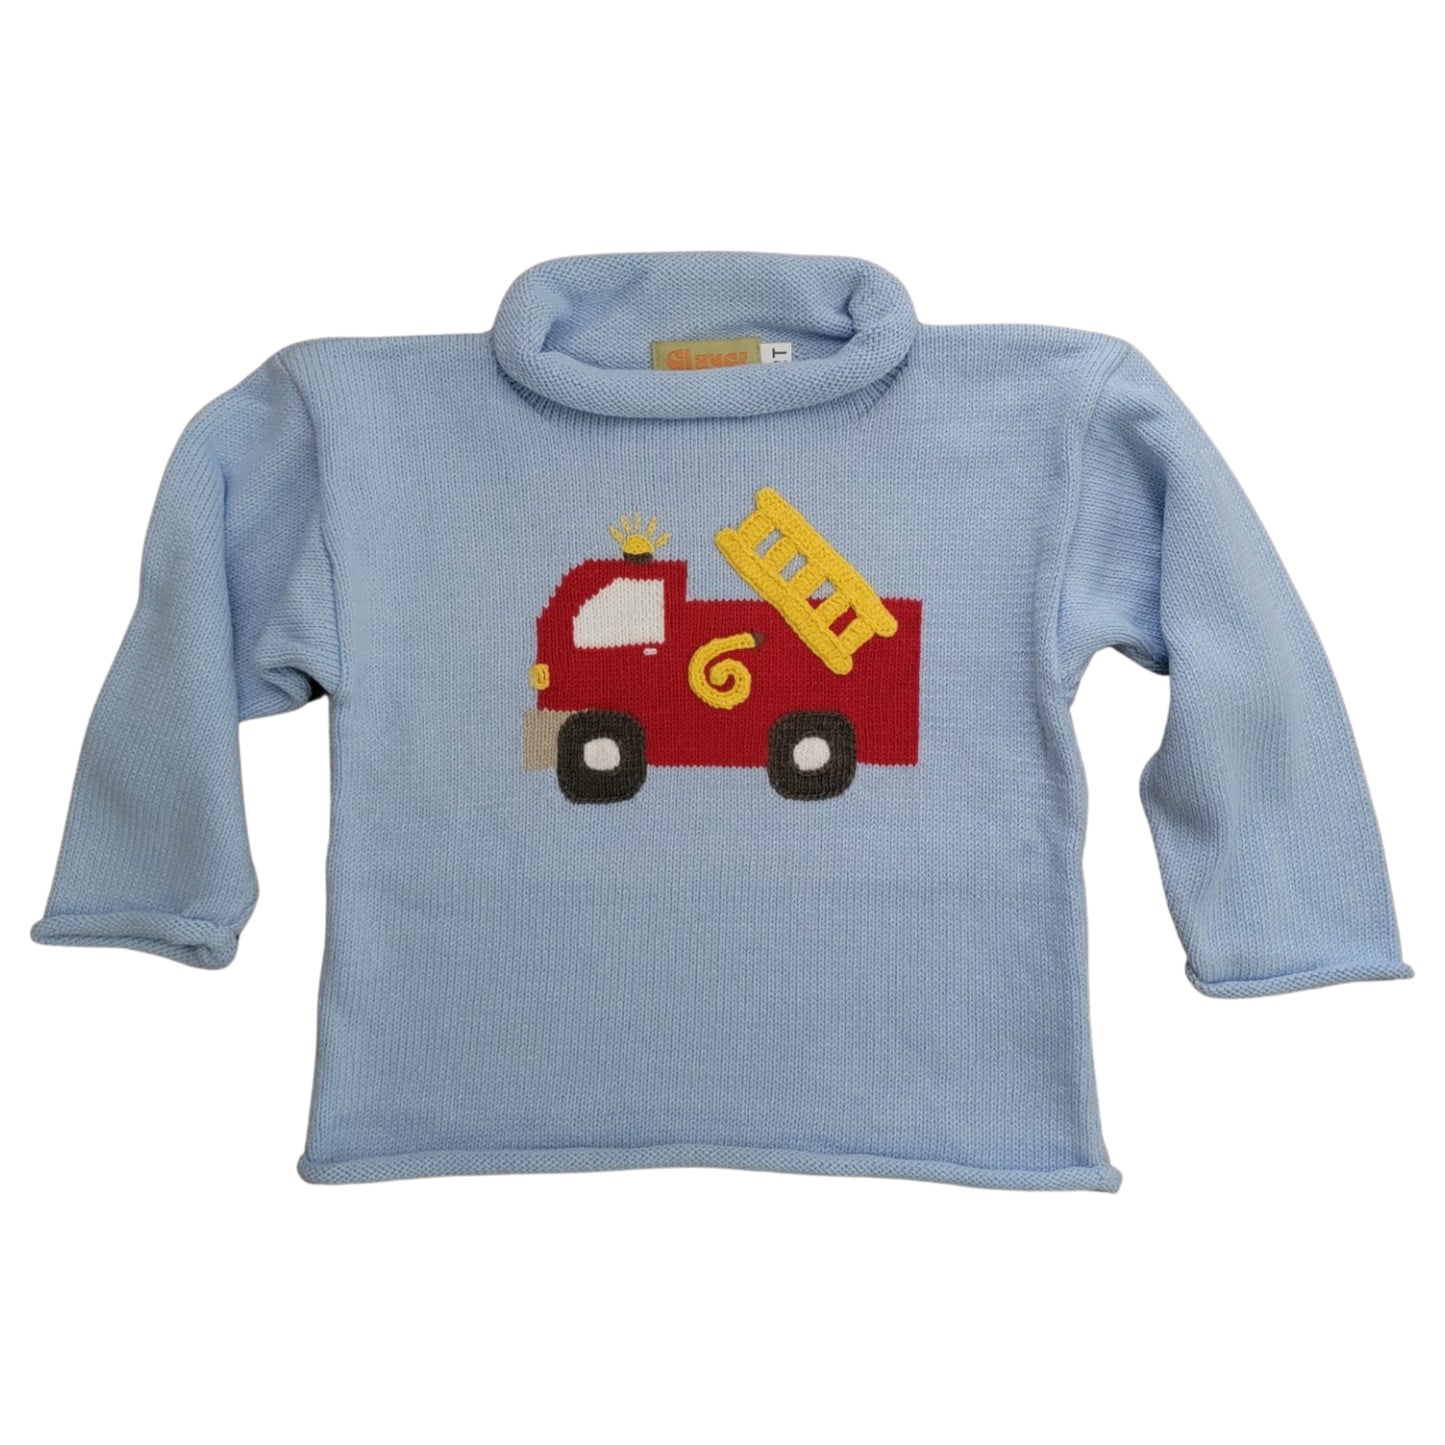 Rollneck Blue Sweater with Fire Truck